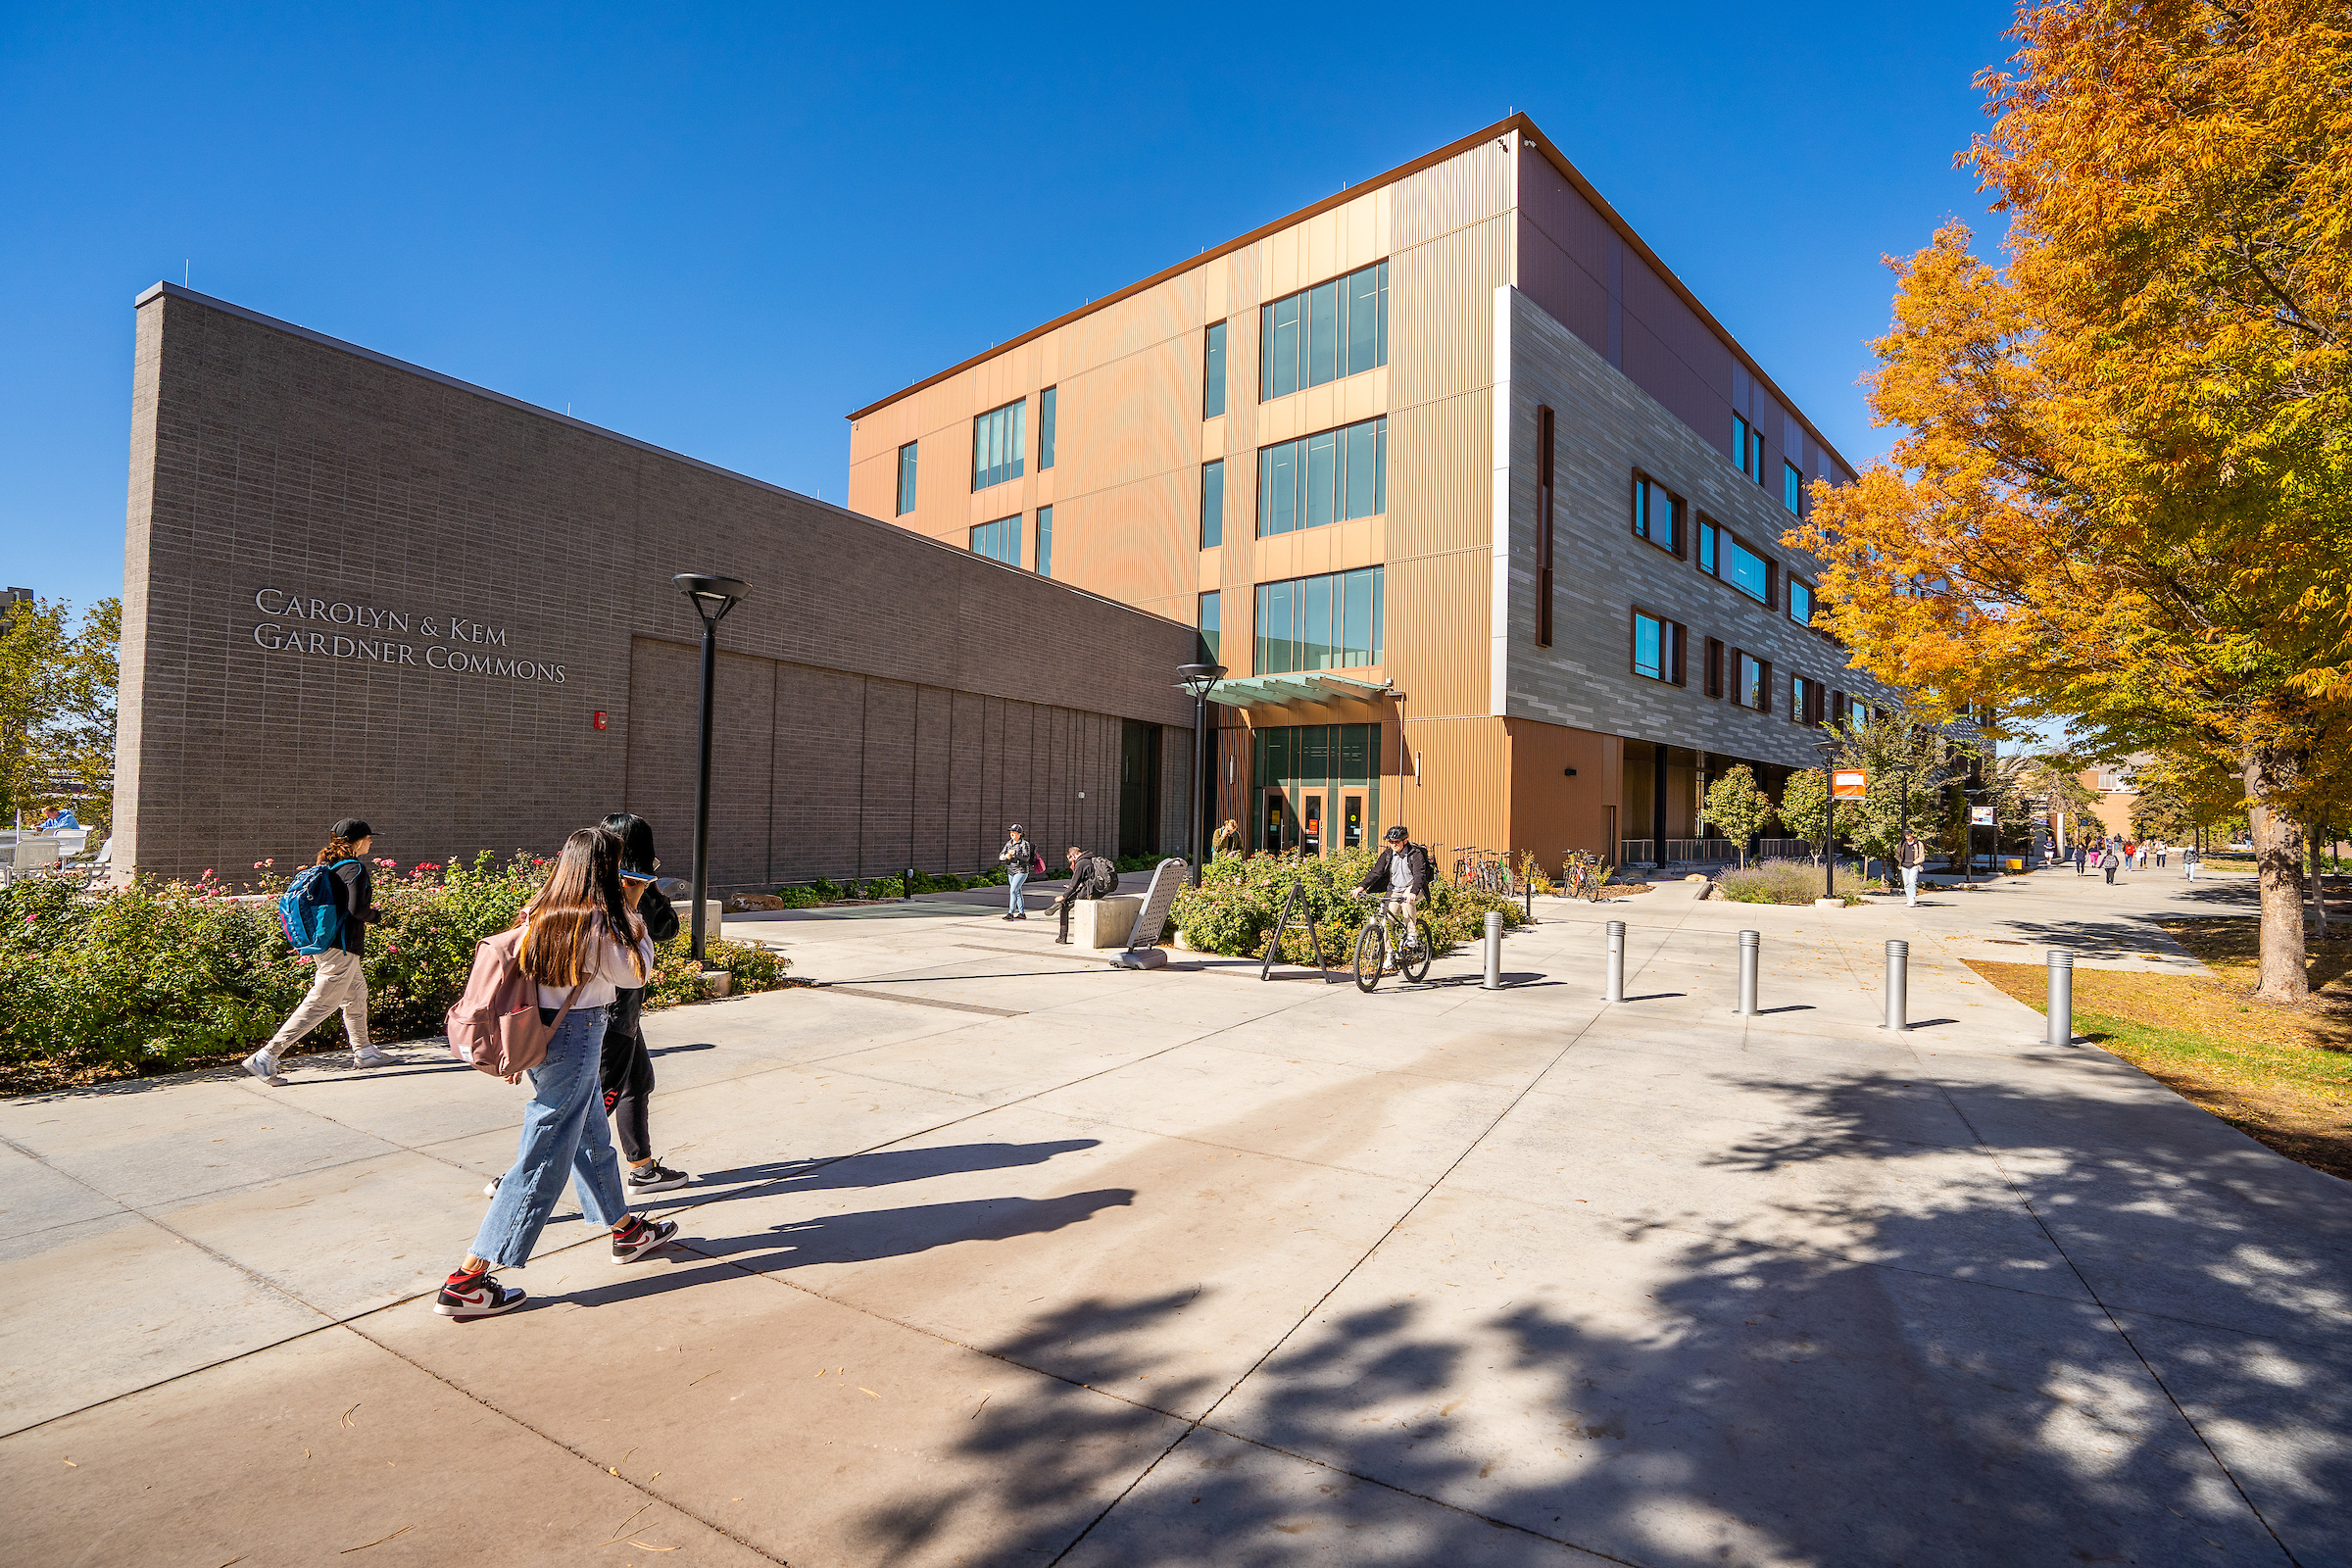 the exterior of the Gardner Commons building on the University of Utah campus